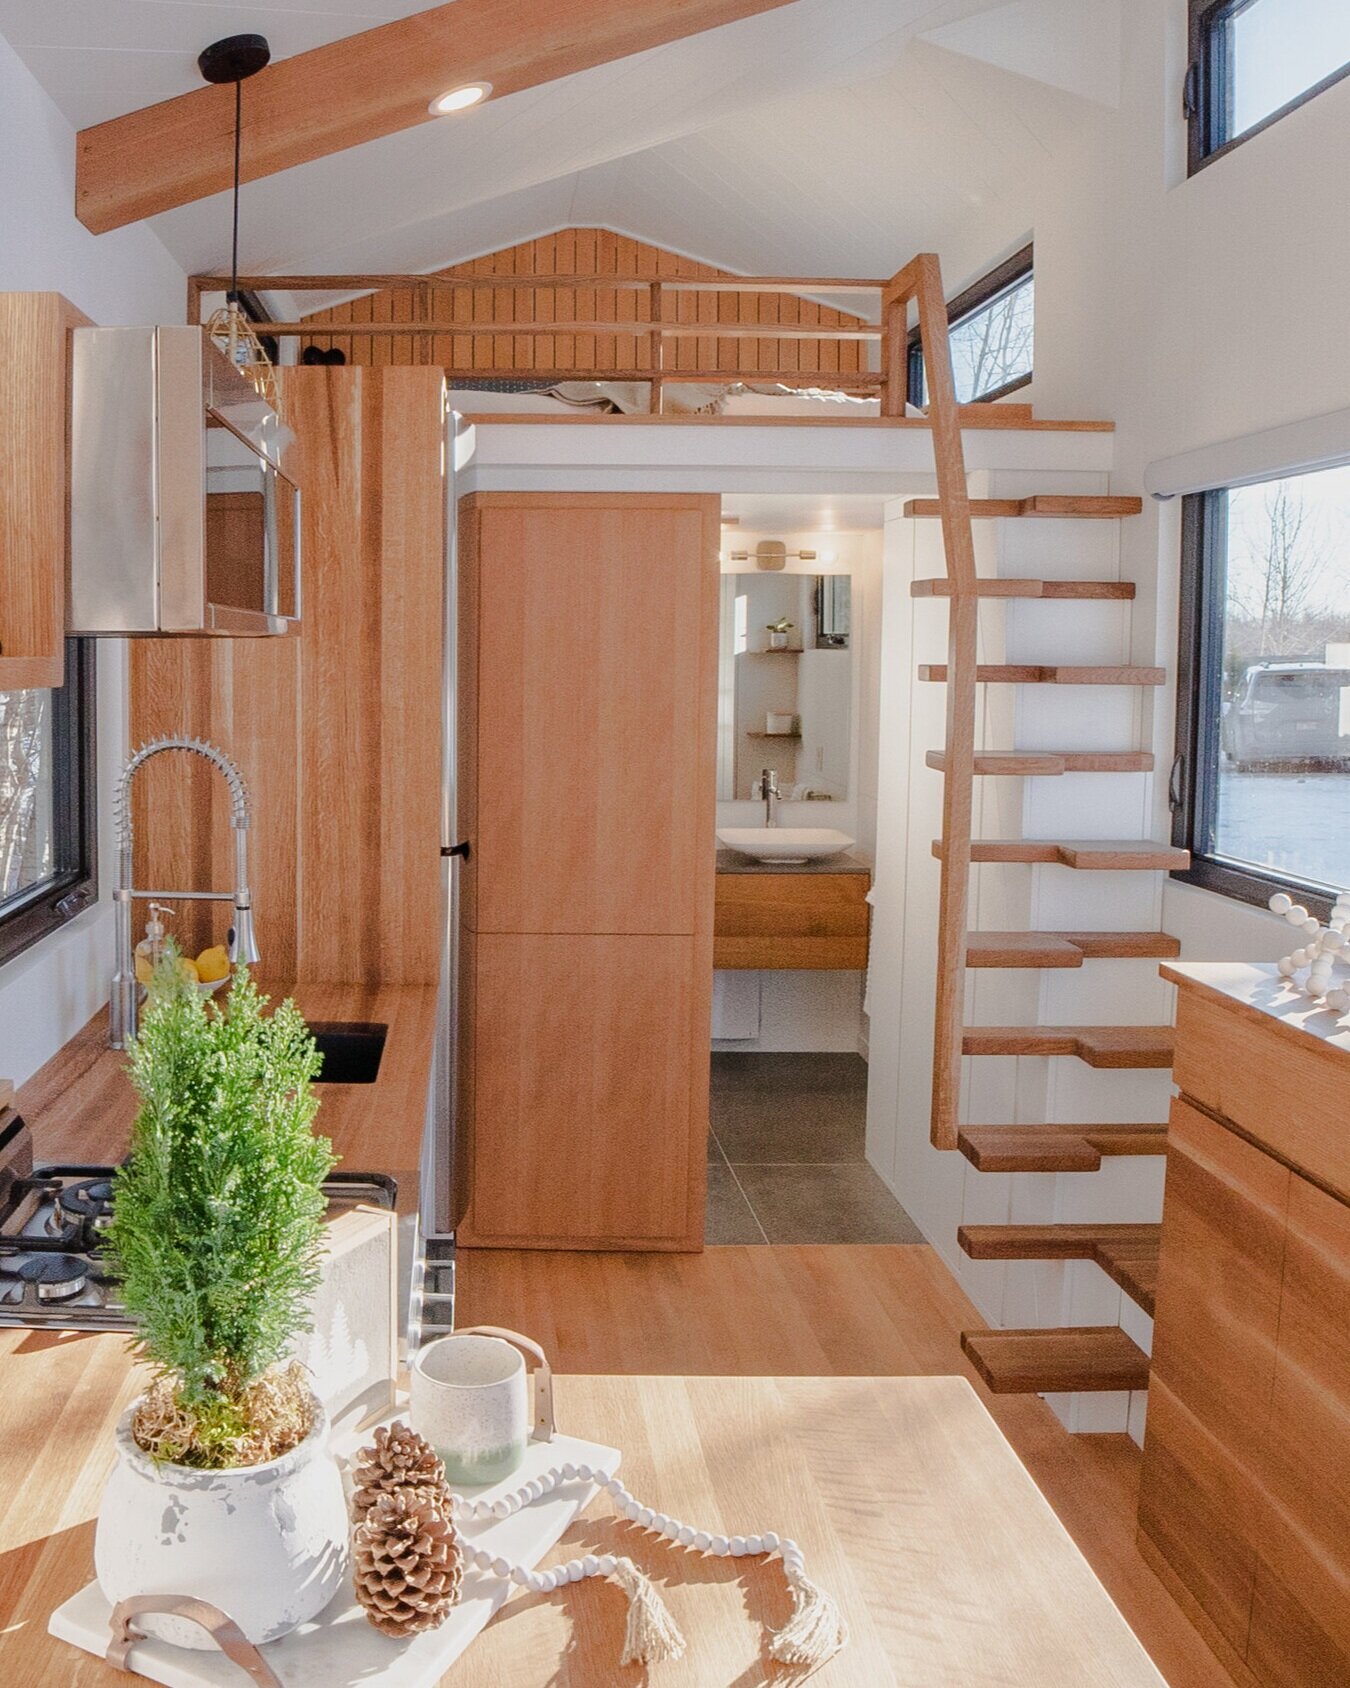 Tiny house boosts living space with motorized deck and spiral staircase